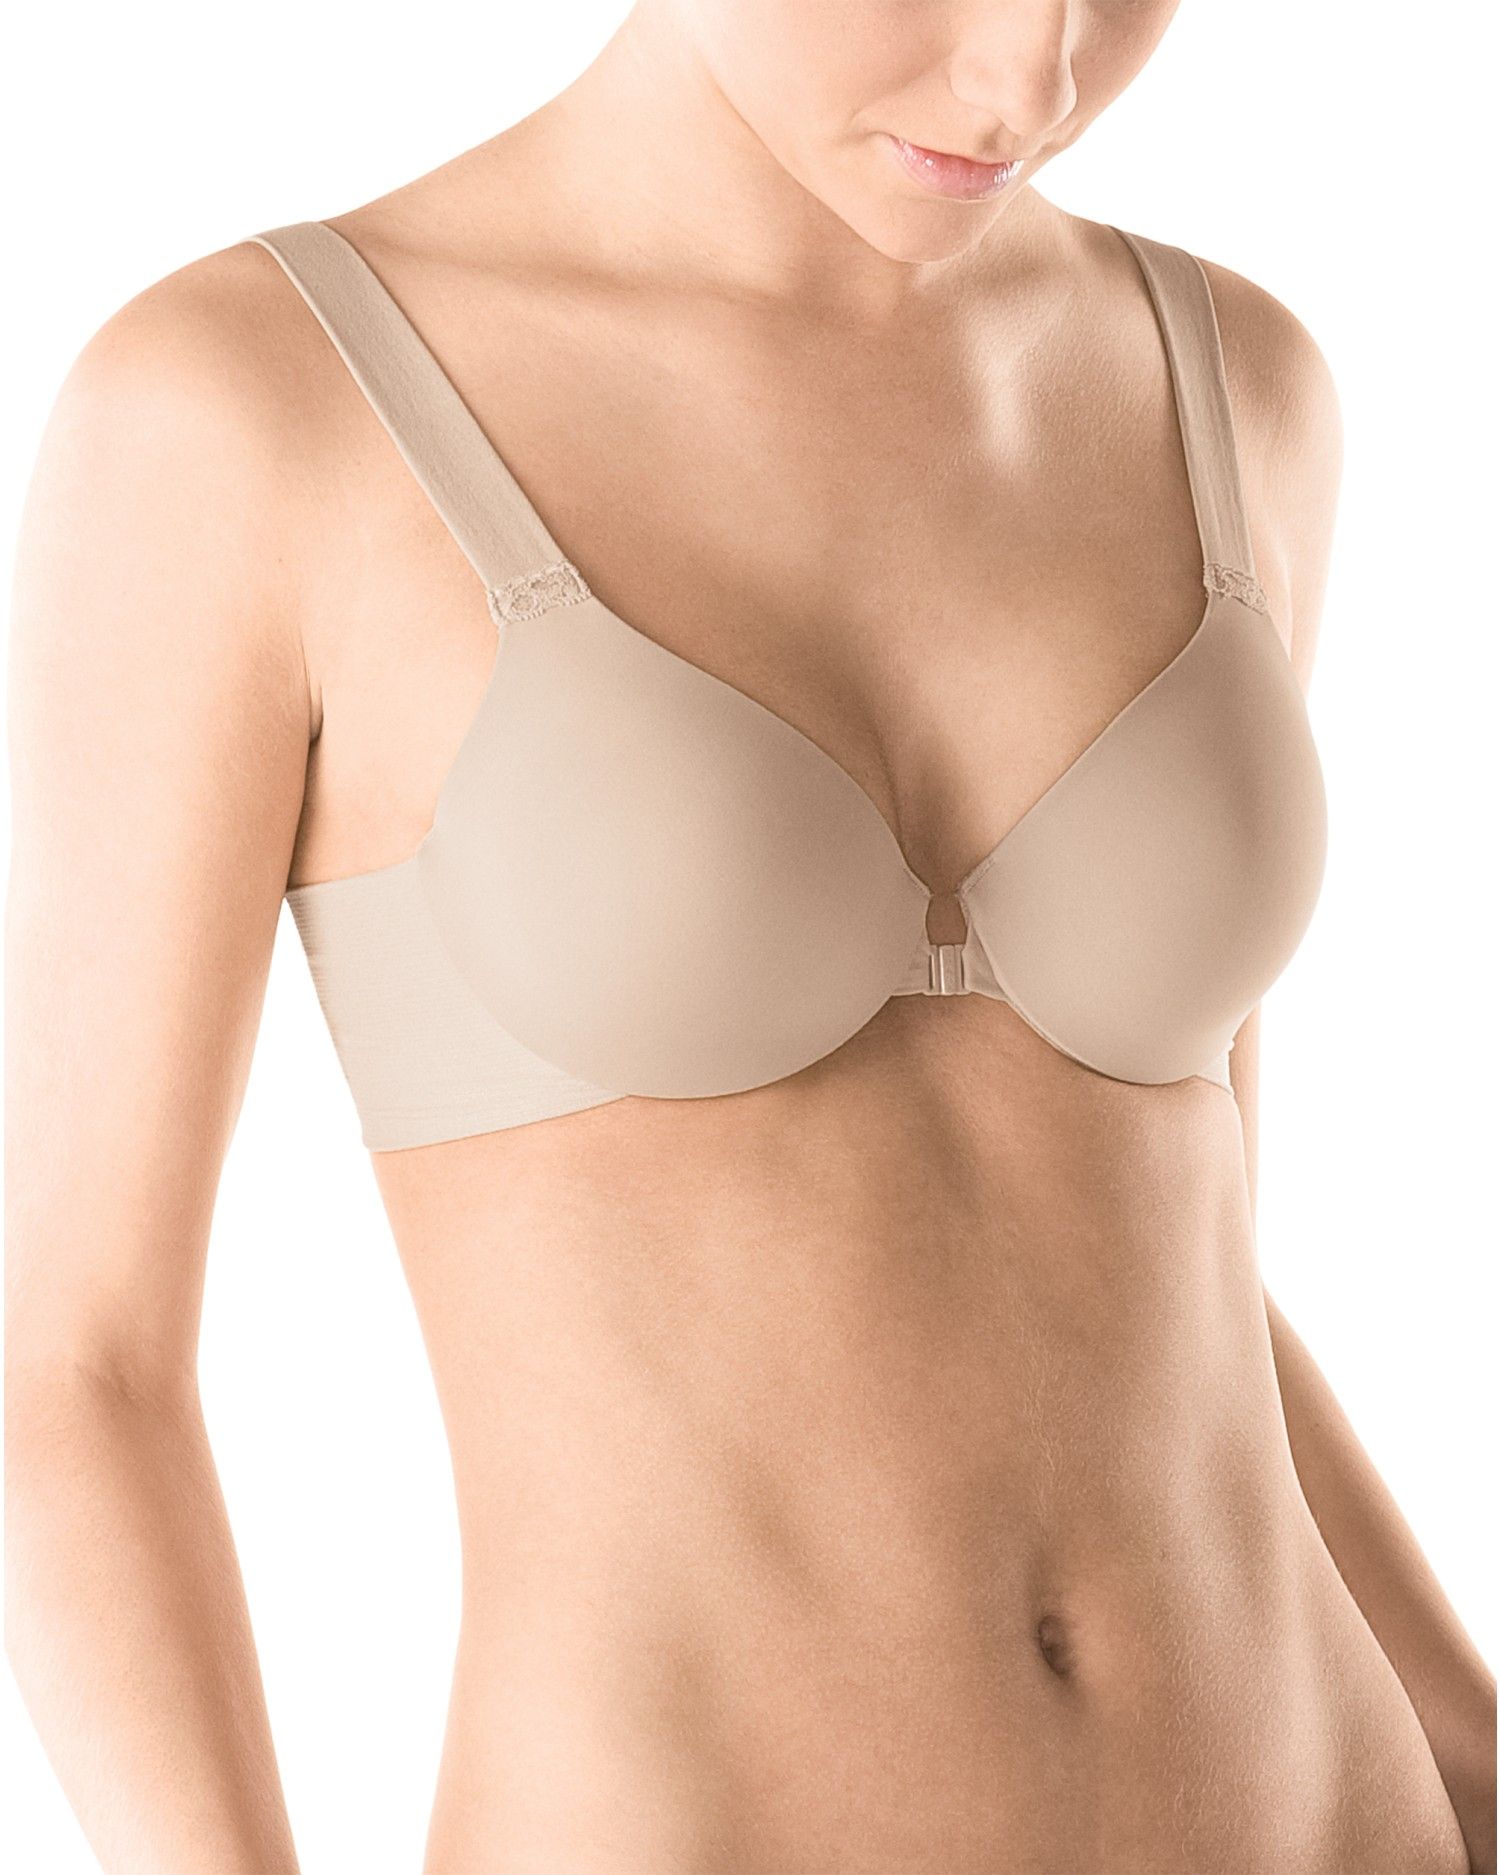 Spanx Bra-llelujah Full Coverage Bra Review, Price and Features - Pros and  Cons of Spanx Bra-llelujah Full Coverage Bra